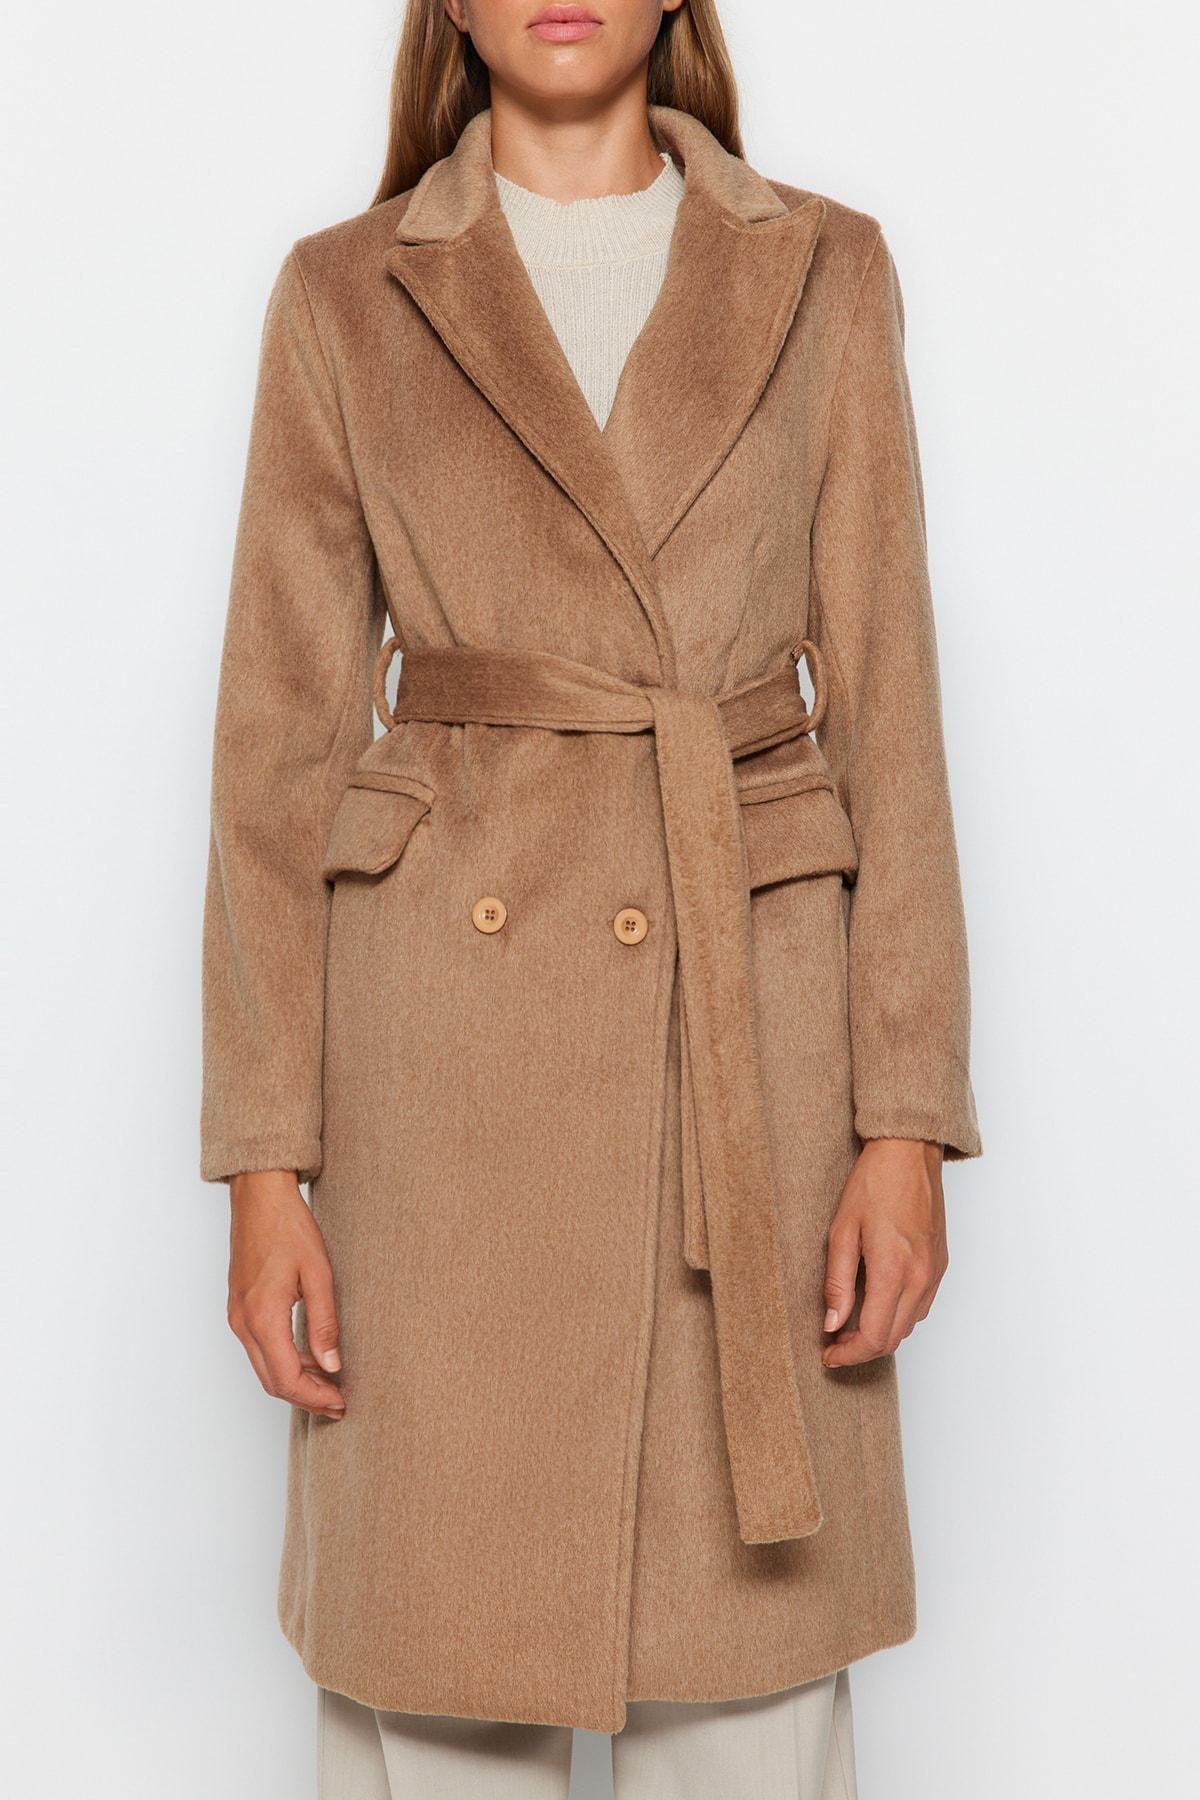 Trendyol - Brown Oversize Wide Cut Long Stitched Coat